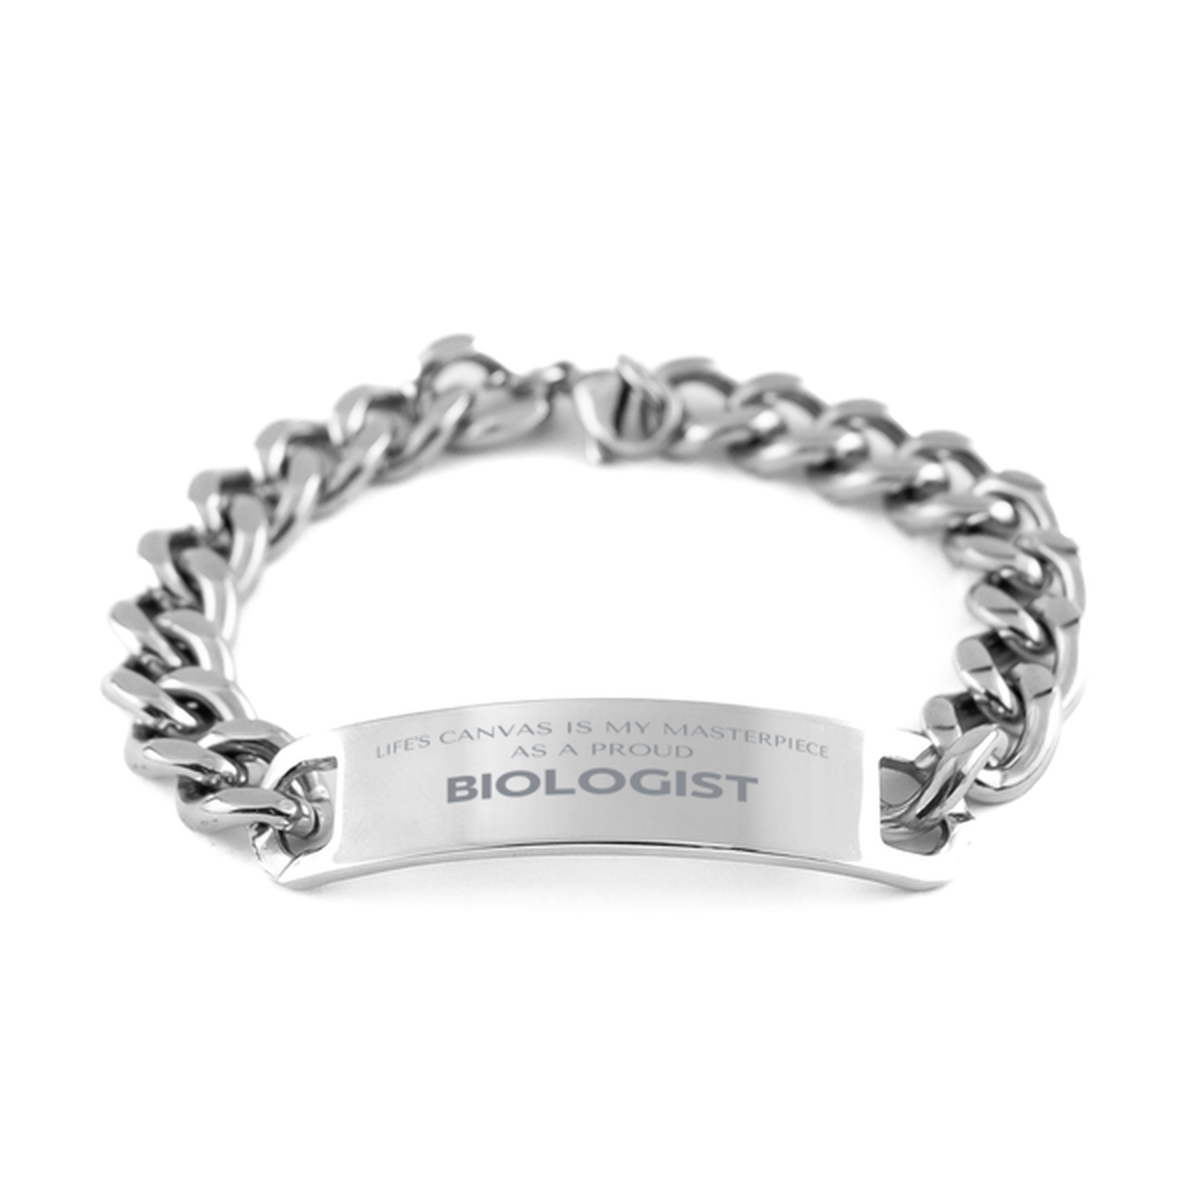 Proud Biologist Gifts, Life's canvas is my masterpiece, Epic Birthday Christmas Unique Cuban Chain Stainless Steel Bracelet For Biologist, Coworkers, Men, Women, Friends